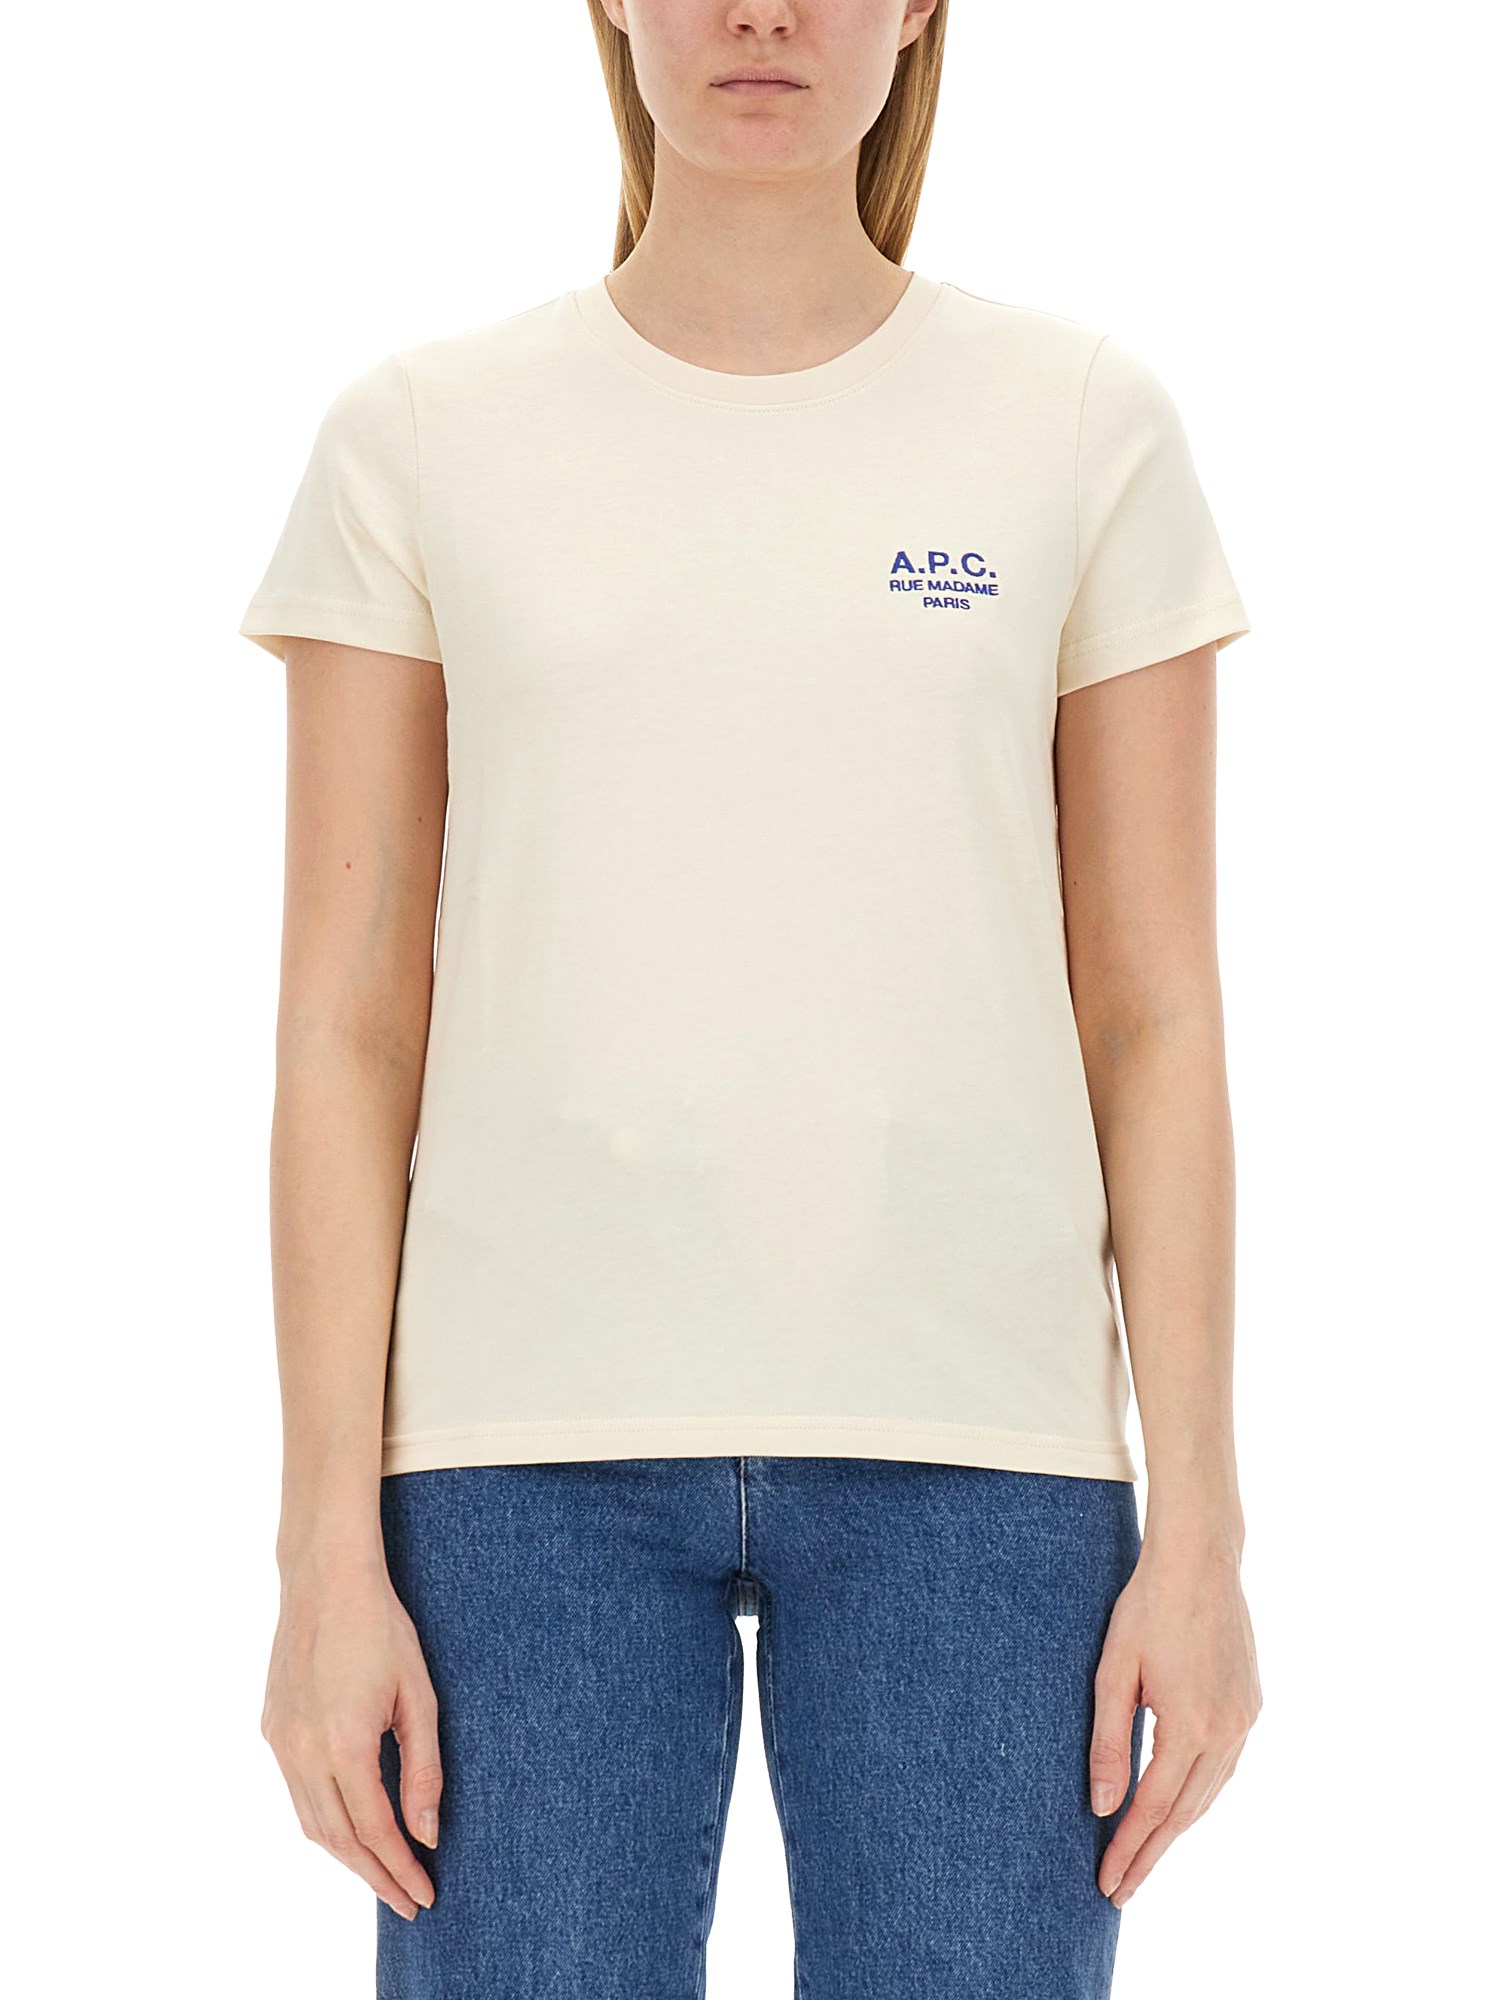 APC T-SHIRT WITH LOGO EMBROIDERY